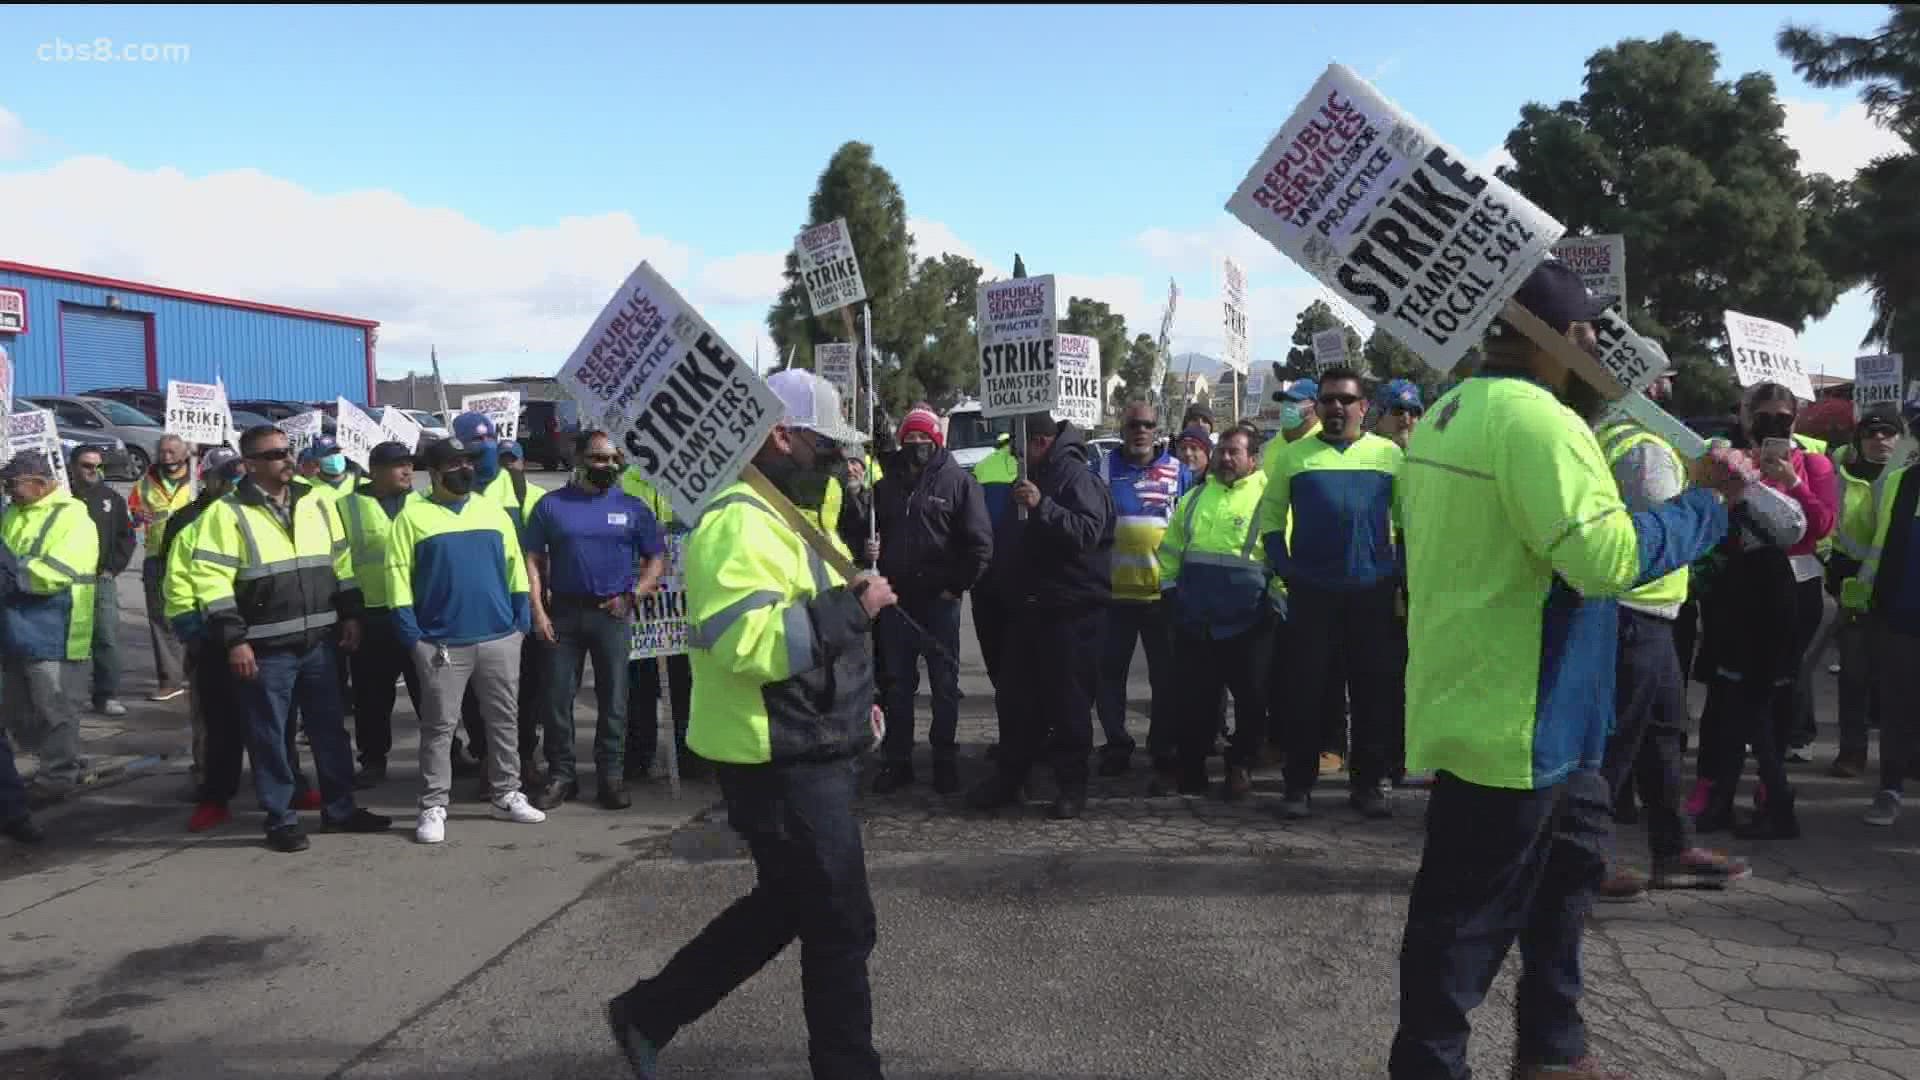 More than 250 Republic Services sanitation workers have been on strike for more than week asking for safer work conditions, higher pay and improved trash trucks.